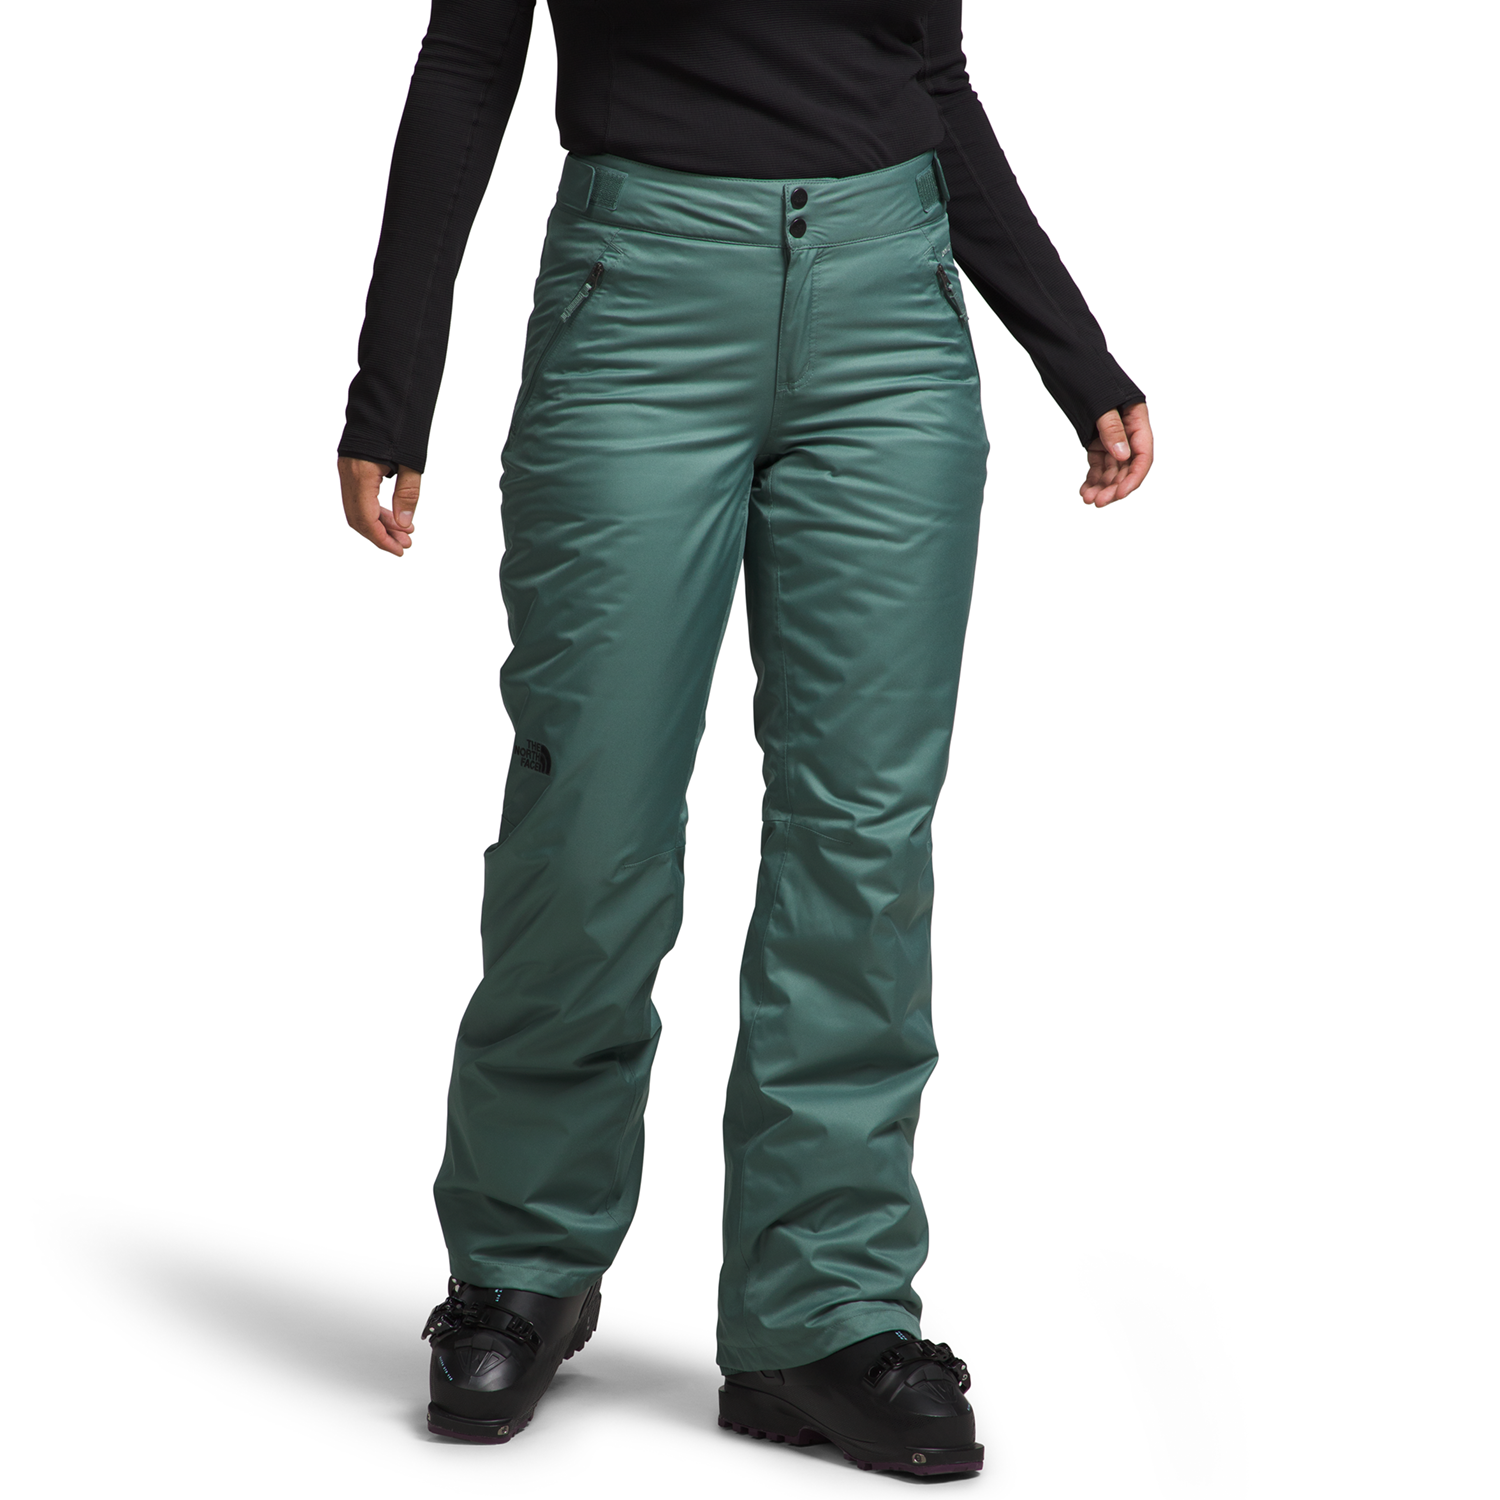 https://images.evo.com/imgp/zoom/238401/1058364/the-north-face-sally-insulated-pants-women-s-.jpg